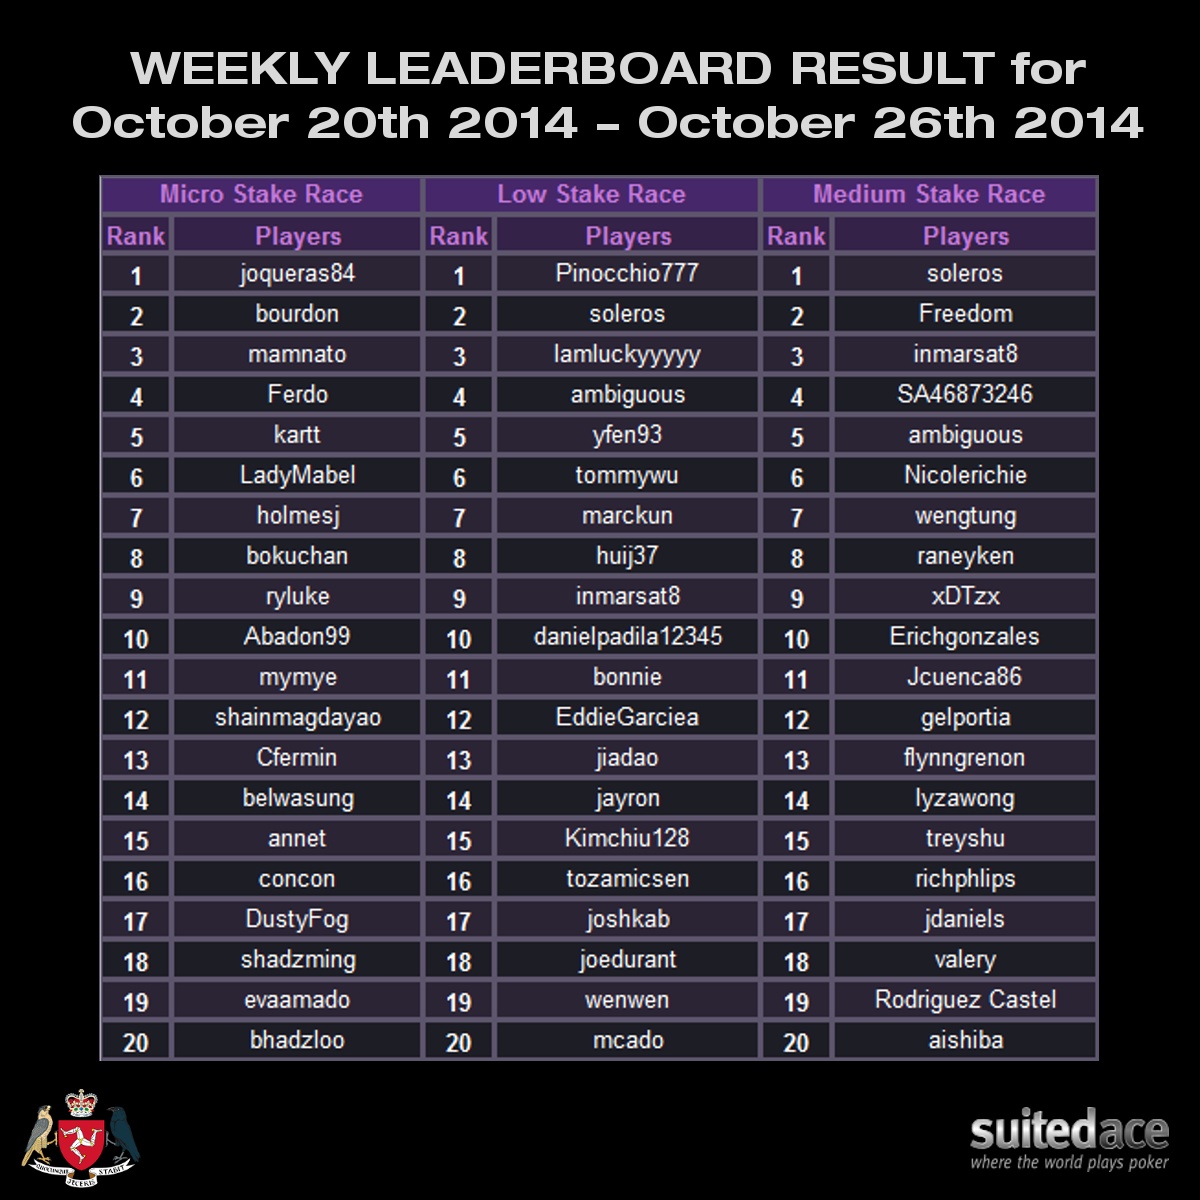 Weekly Leaderboard Result for October 20th 2014 - October 26th 2014